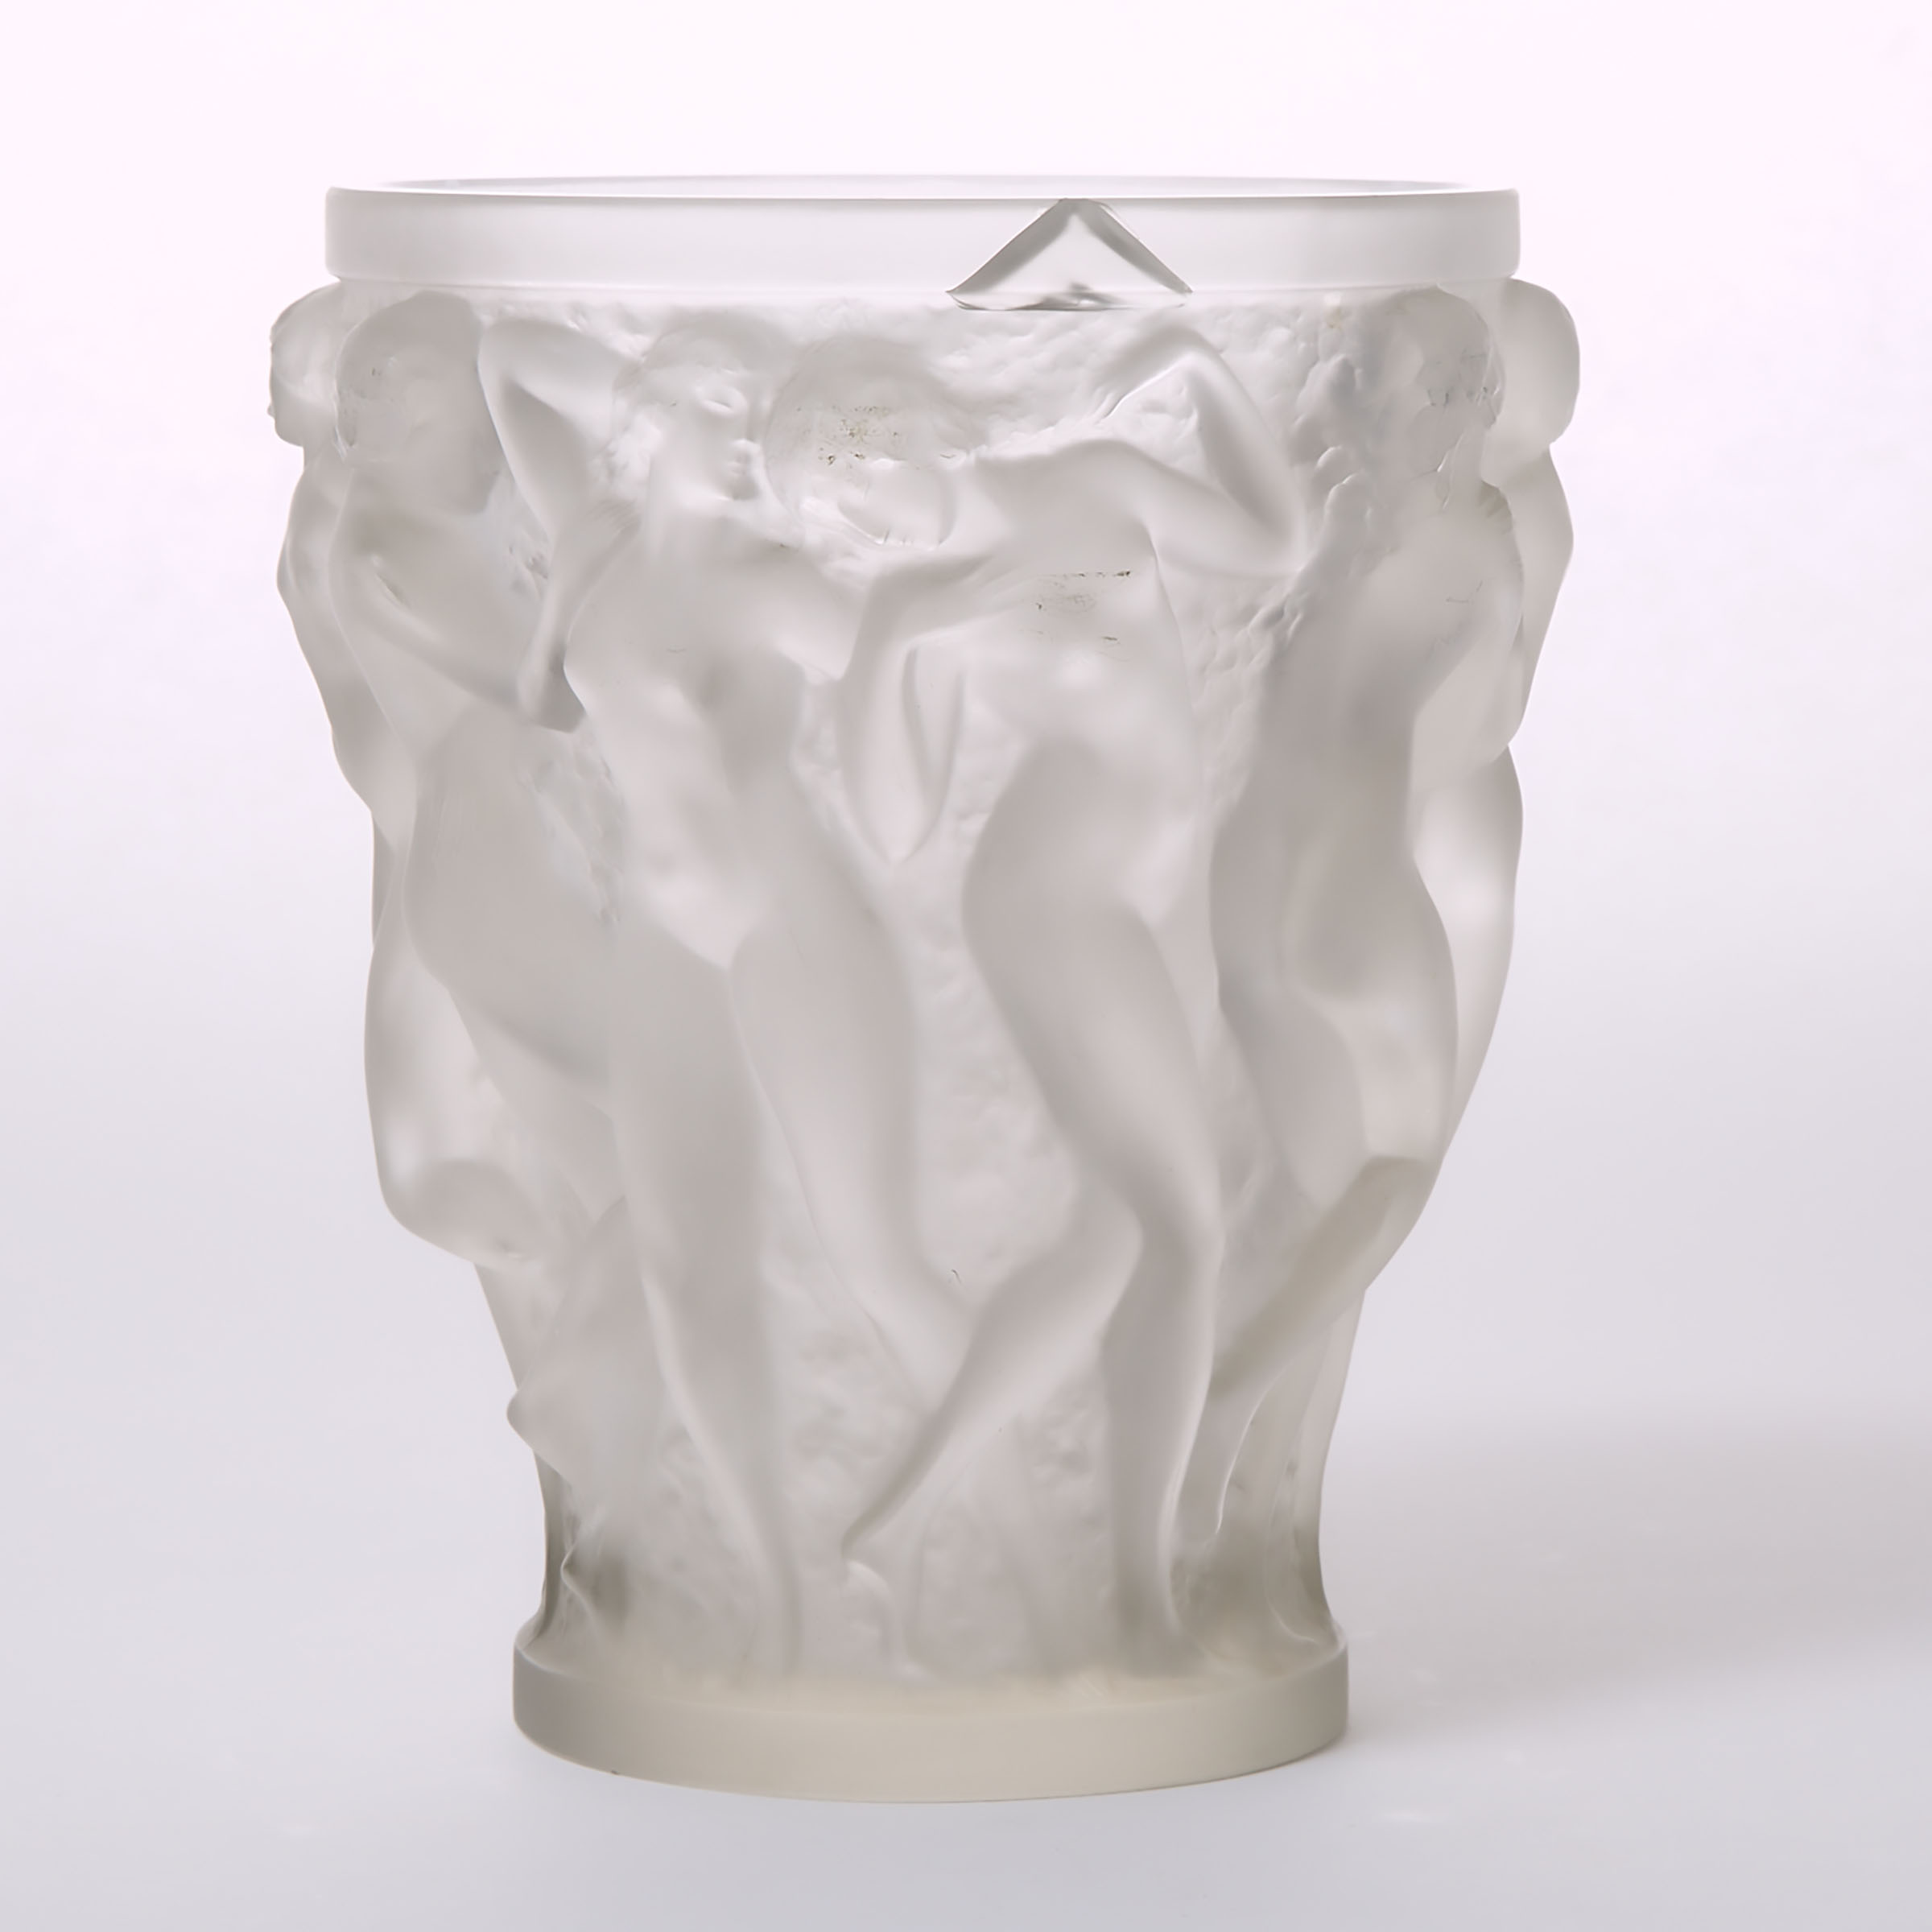 ‘Bacchantes’, Lalique Moulded and Frosted Glass Vase, post-1945